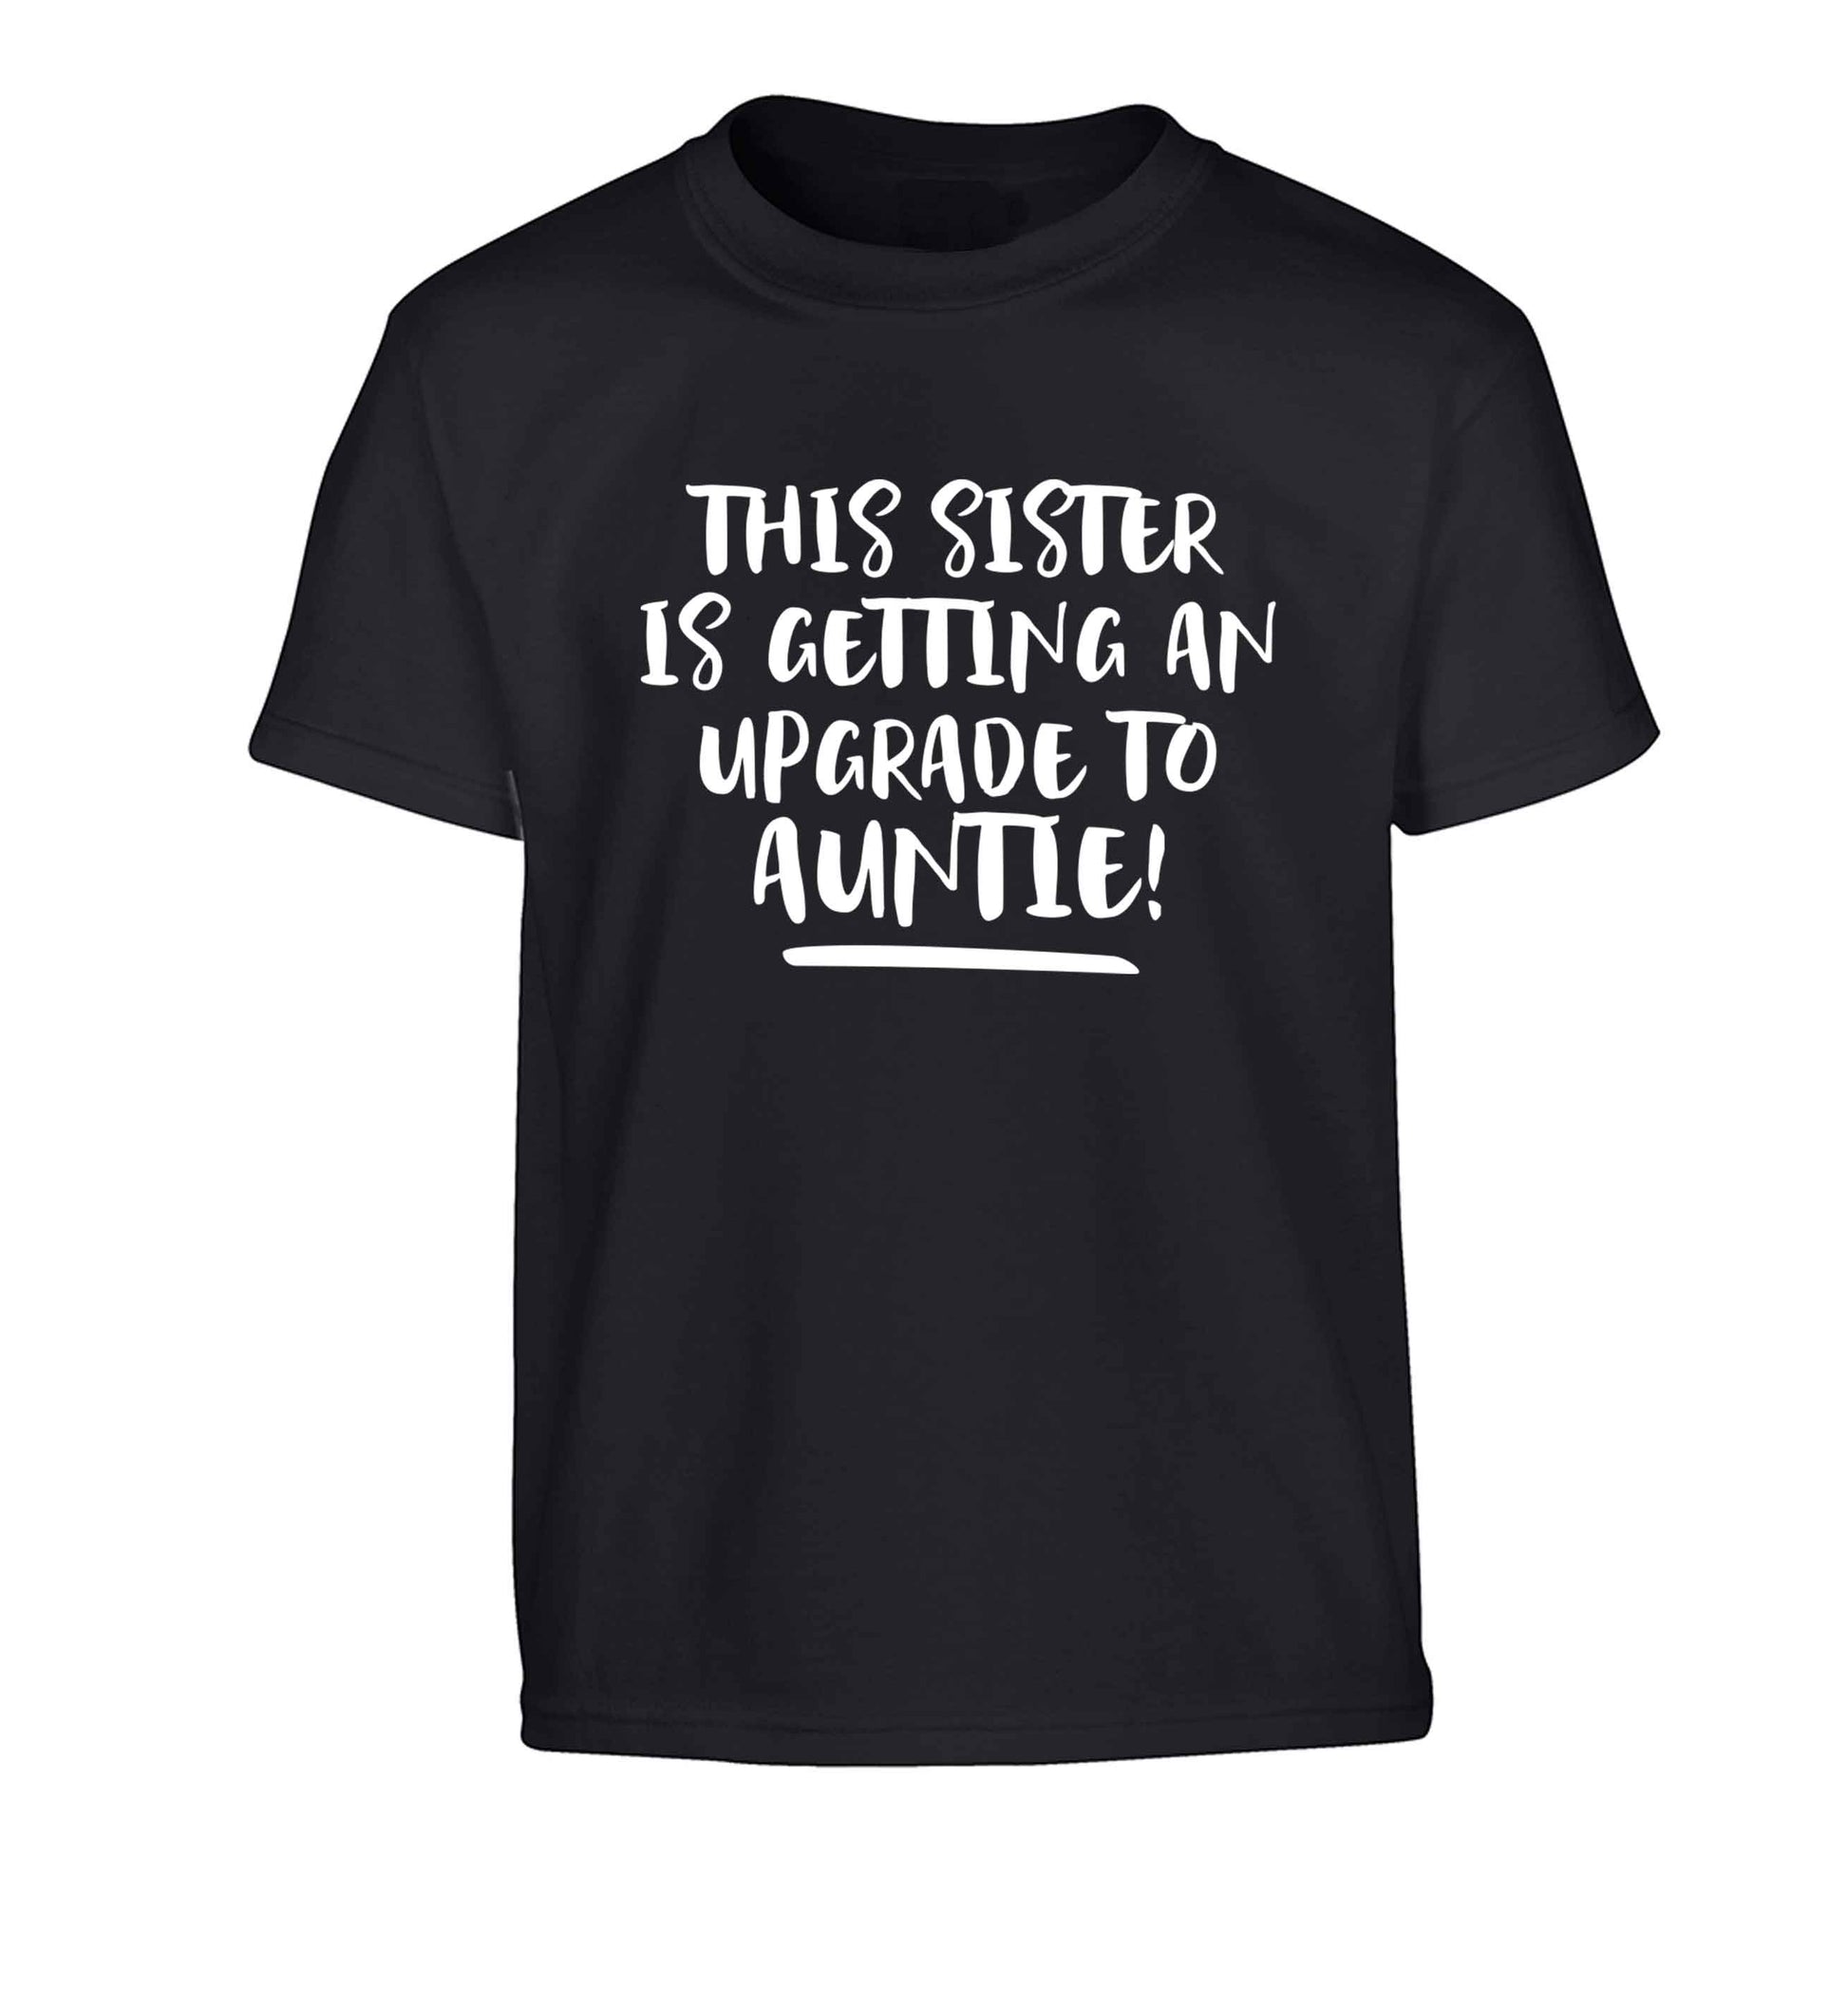 This sister is getting an upgrade to auntie! Children's black Tshirt 12-13 Years